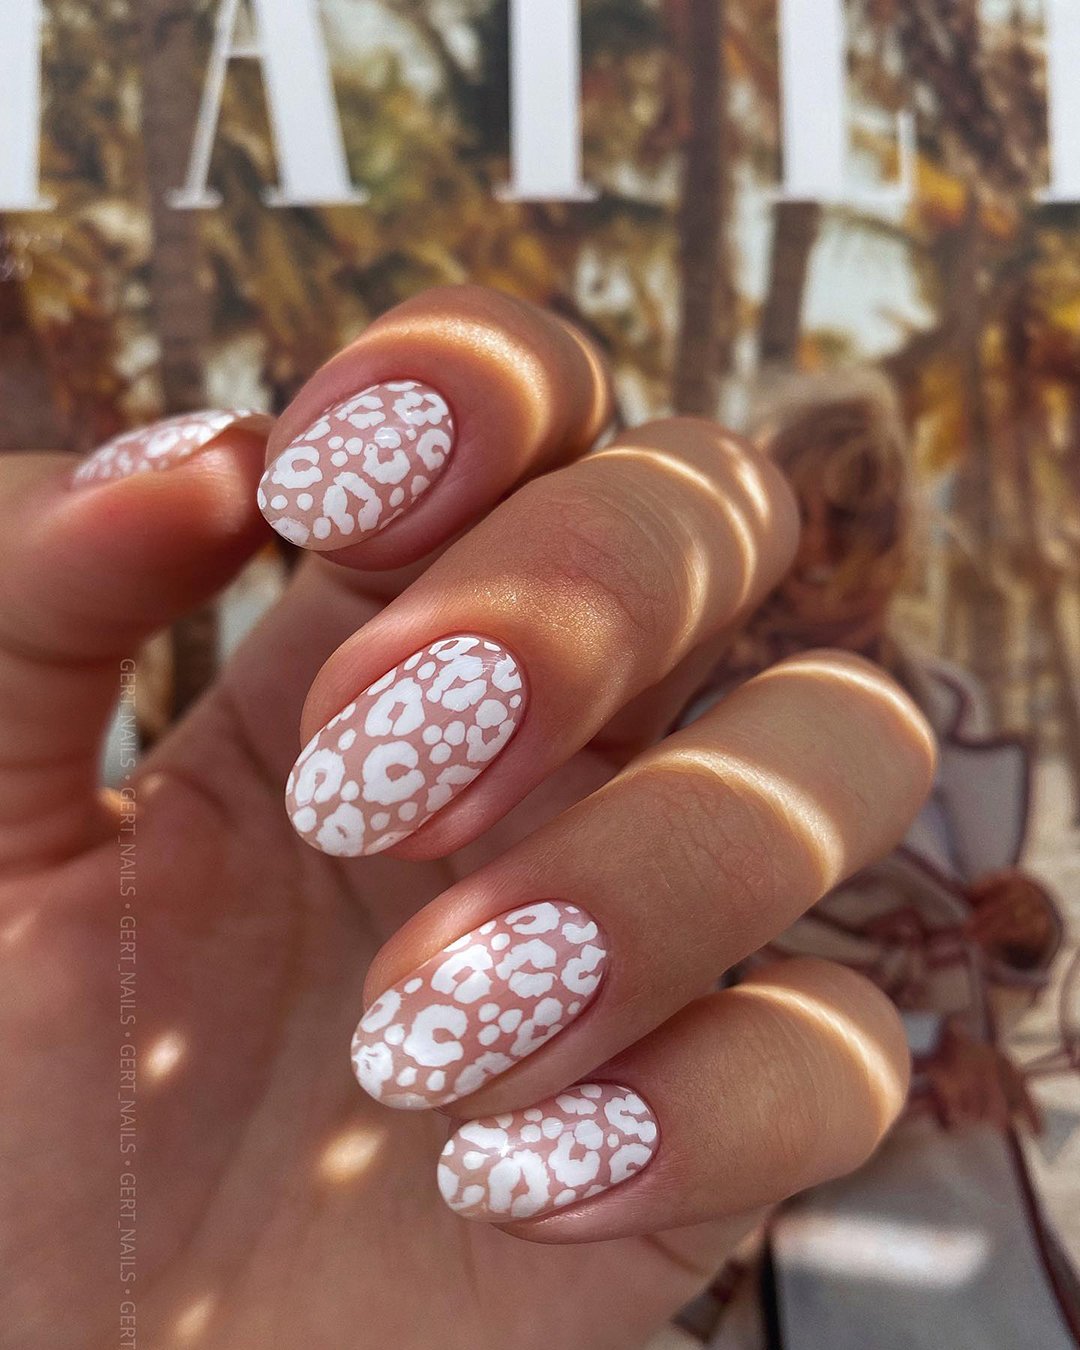 pinterest nails for wedding white lace pattern gert_nails